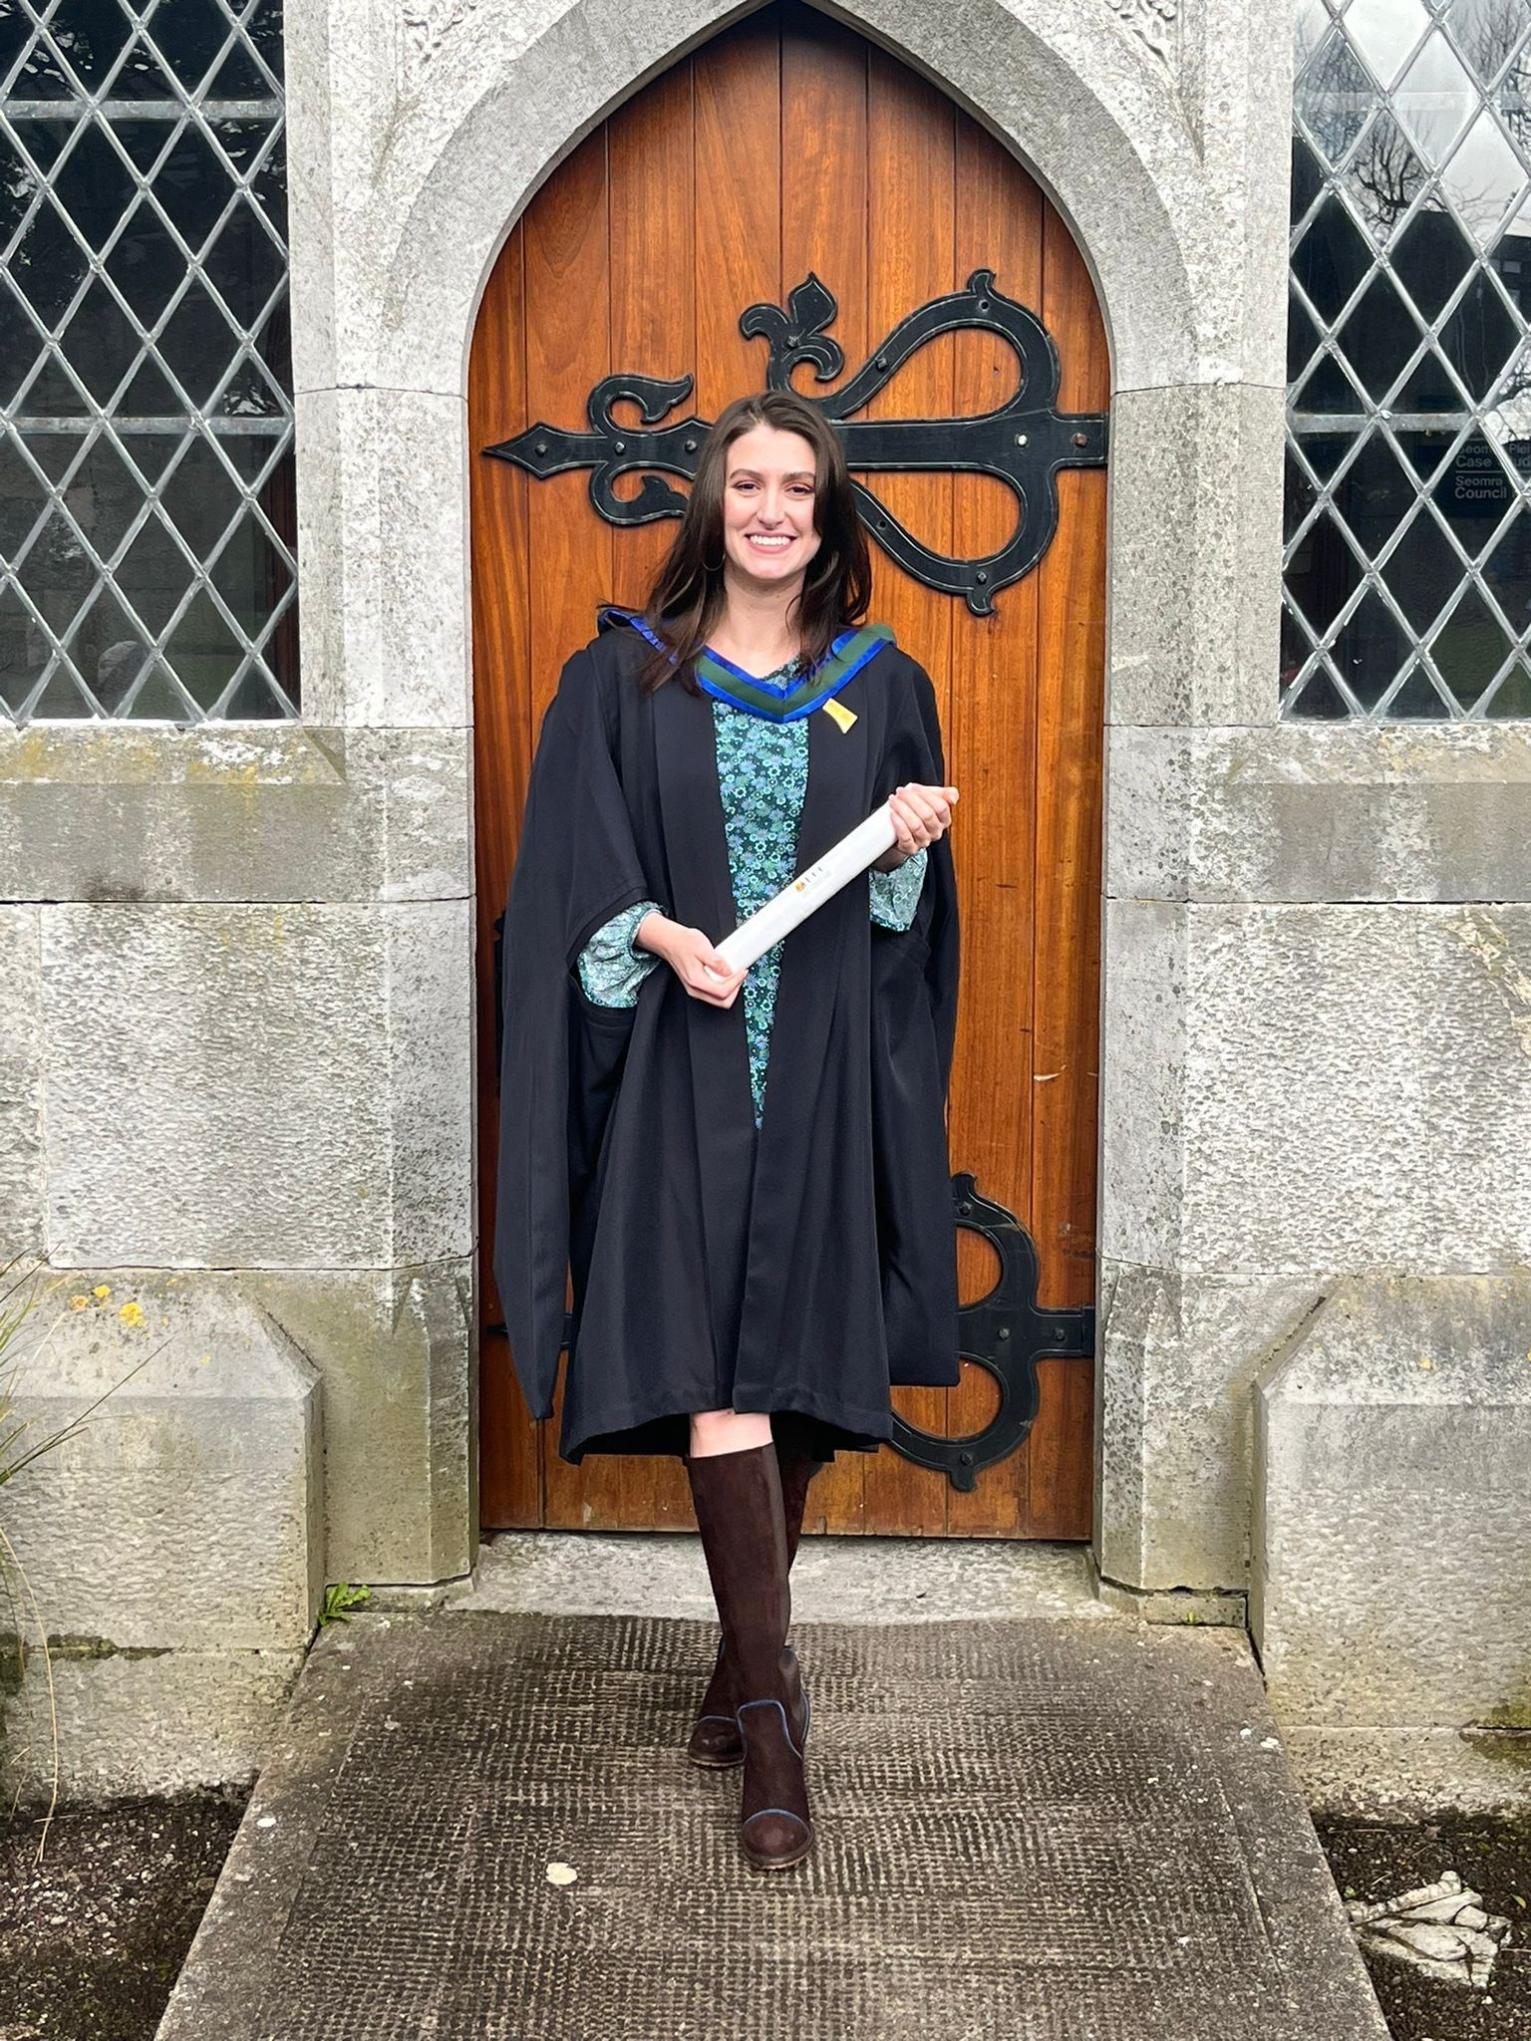 Smiling student with long dark hair, wearing a black gown over a blue dress, and holding a parchment scroll, stands on stone steps in front of an arched wooden door.